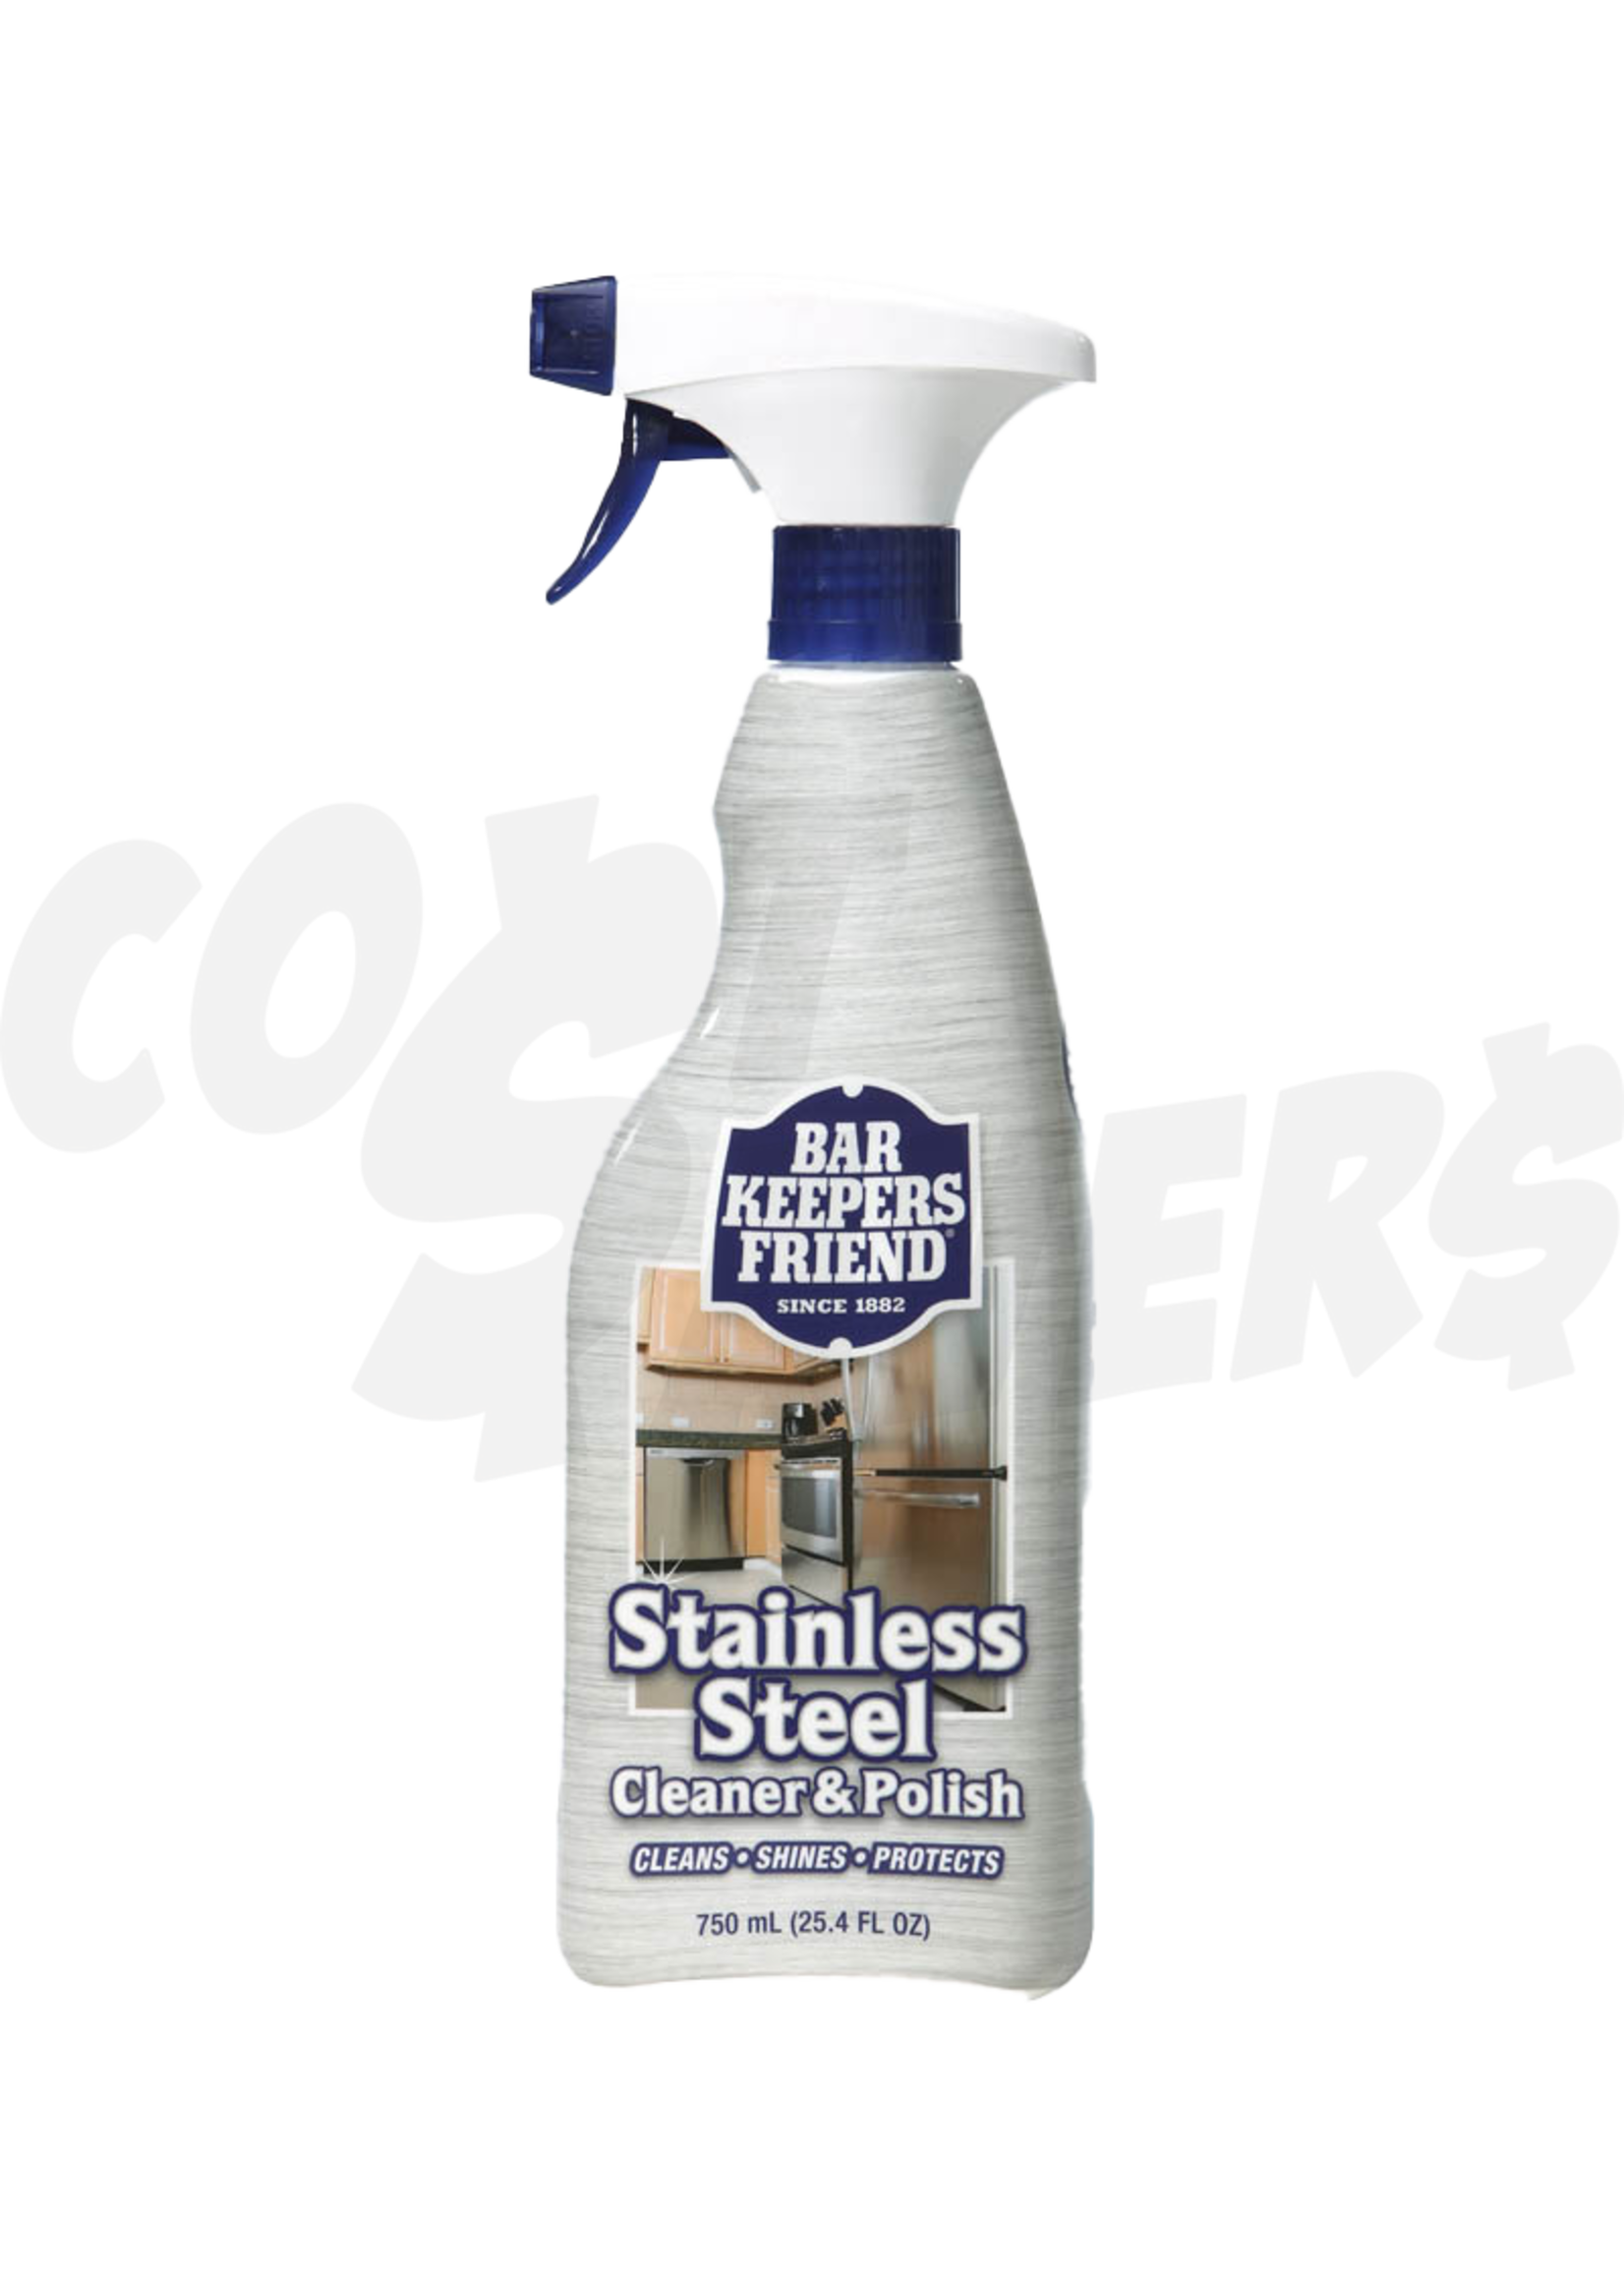 Bar Keepers Friend Bar Keepers Friend  Stainless Steel Cleaner & Polish